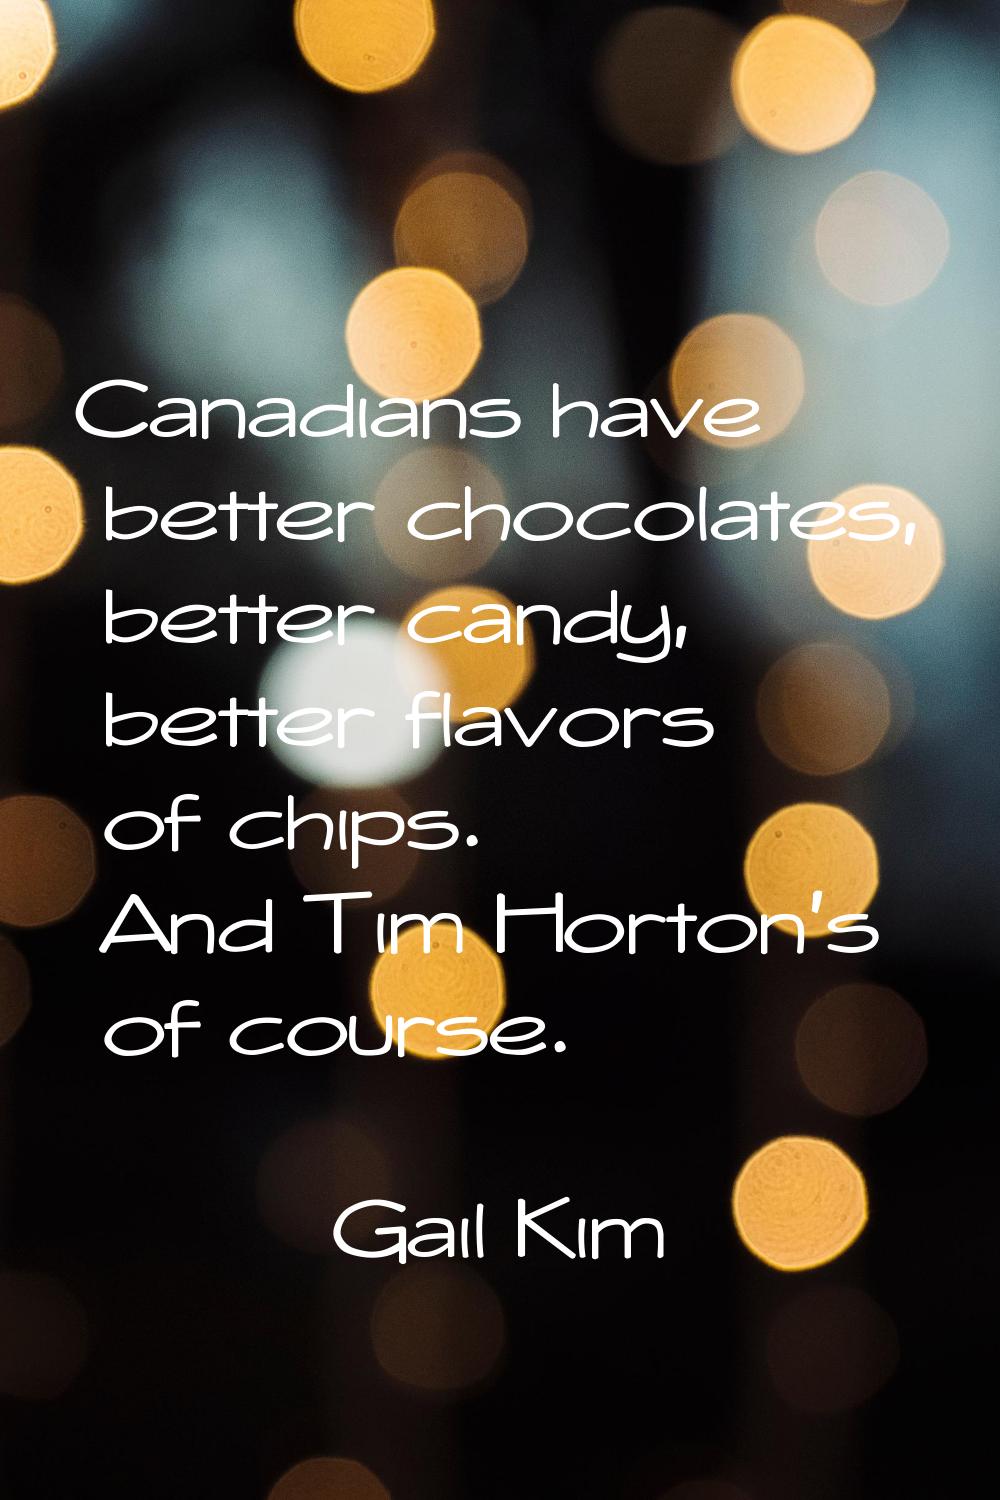 Canadians have better chocolates, better candy, better flavors of chips. And Tim Horton's of course